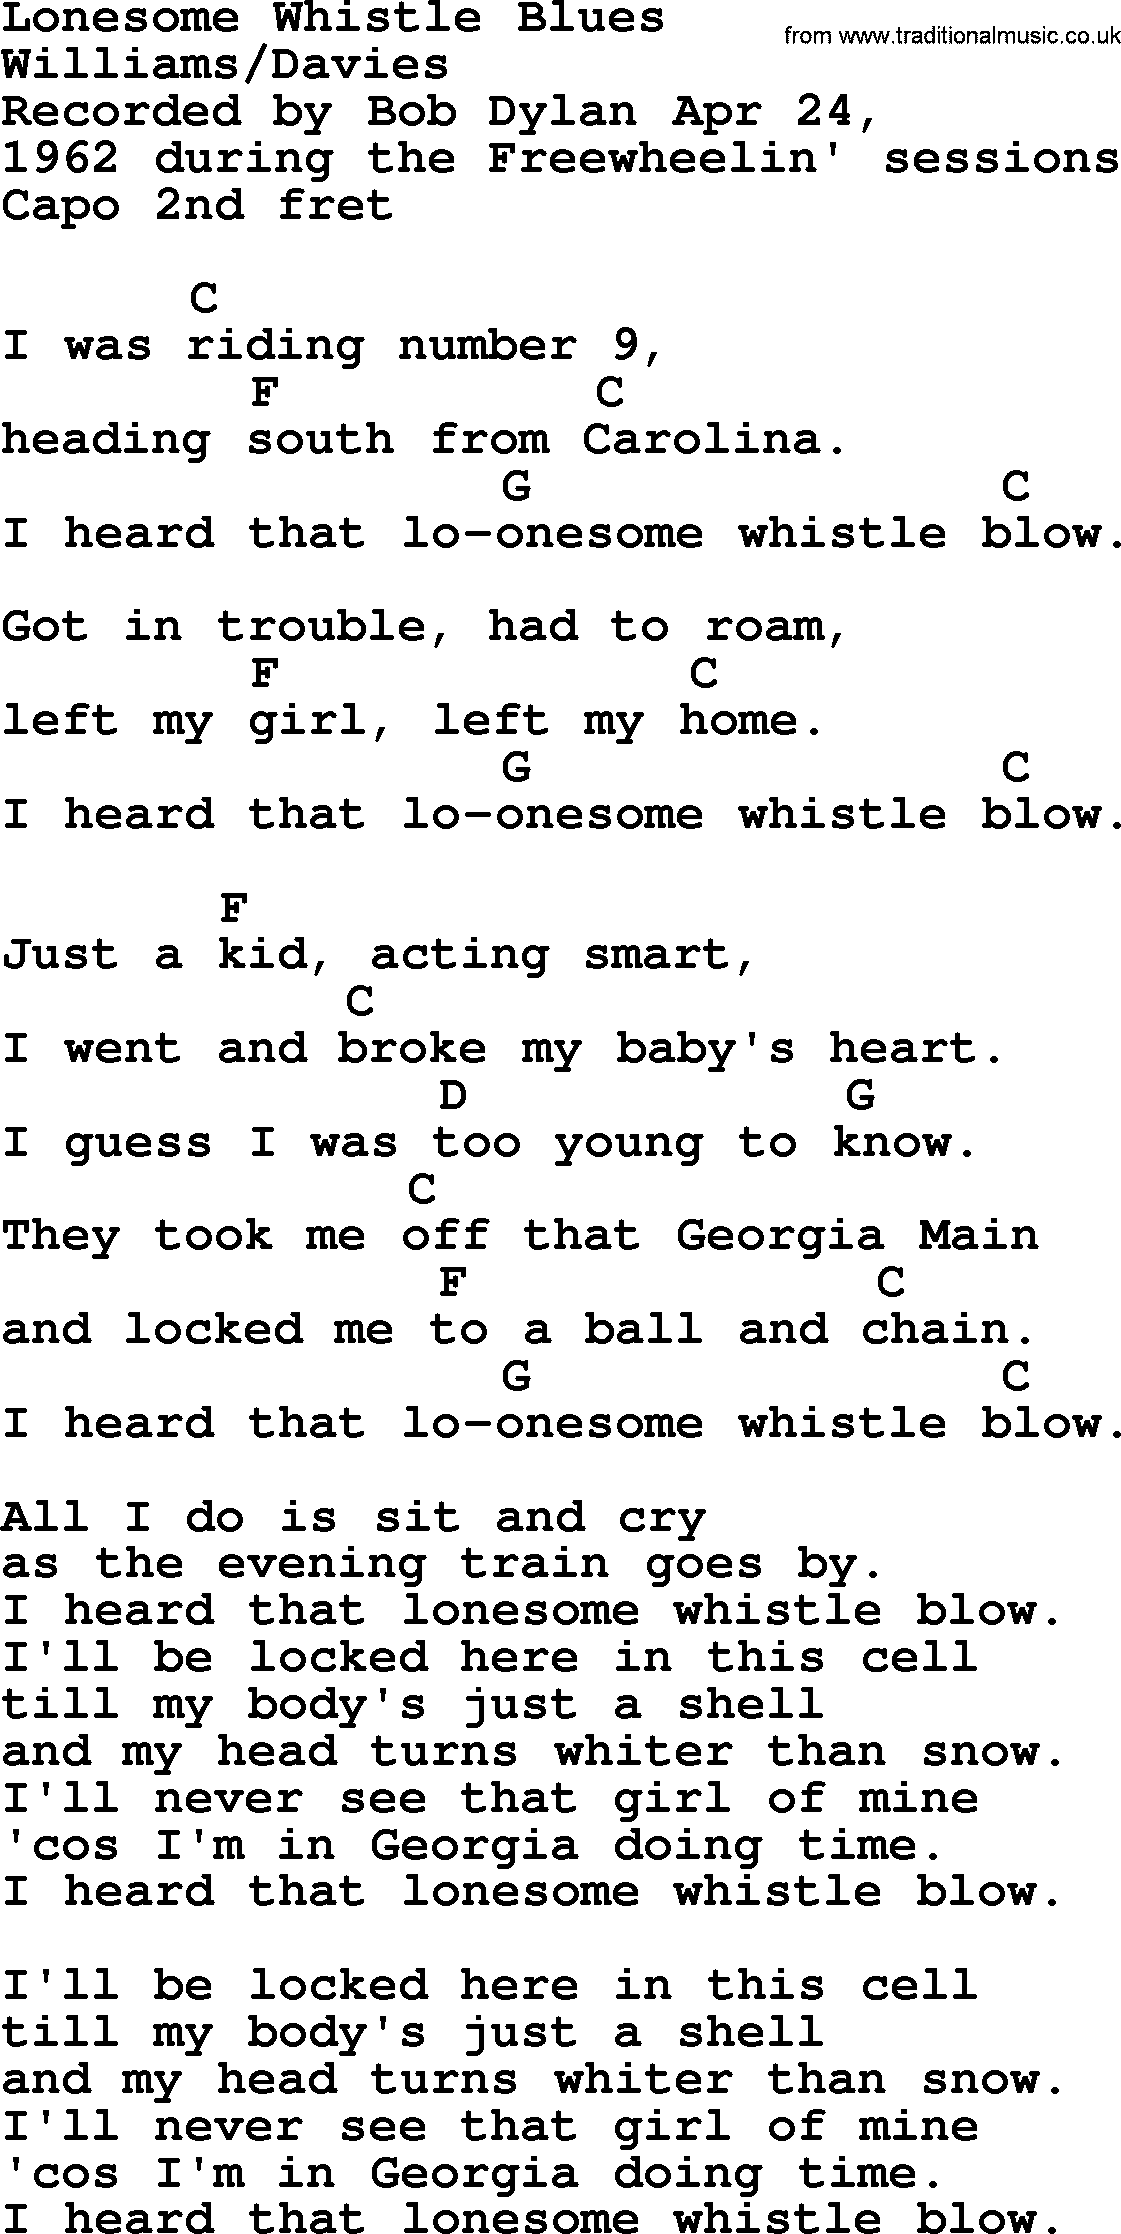 Bob Dylan song, lyrics with chords - Lonesome Whistle Blues